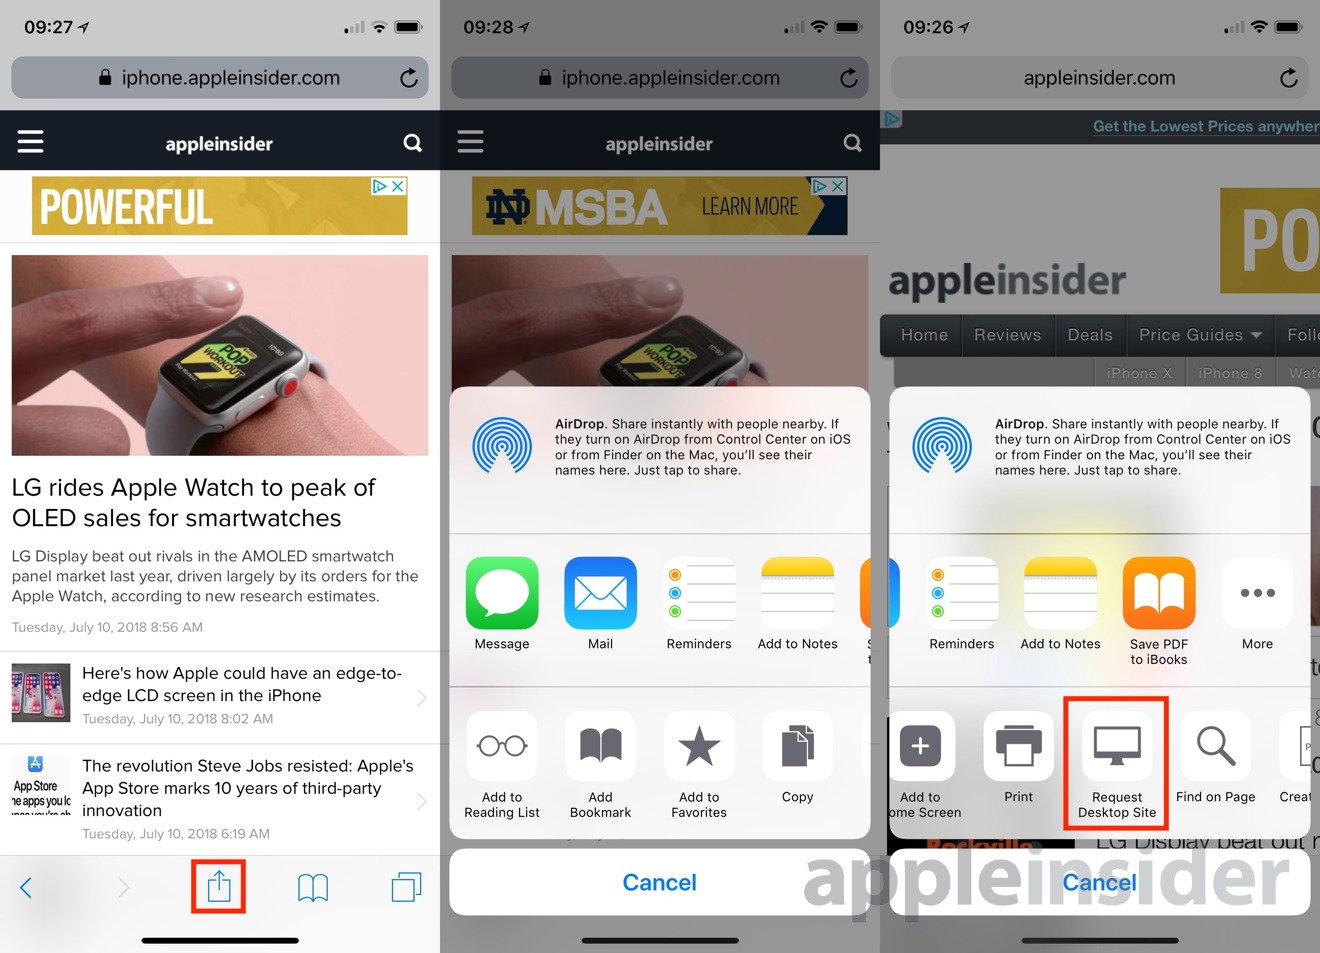 How To Quickly Request The Desktop Version Of A Website On Your Iphone Appleinsider - robloxrequest instagram photos and videos zooppscom